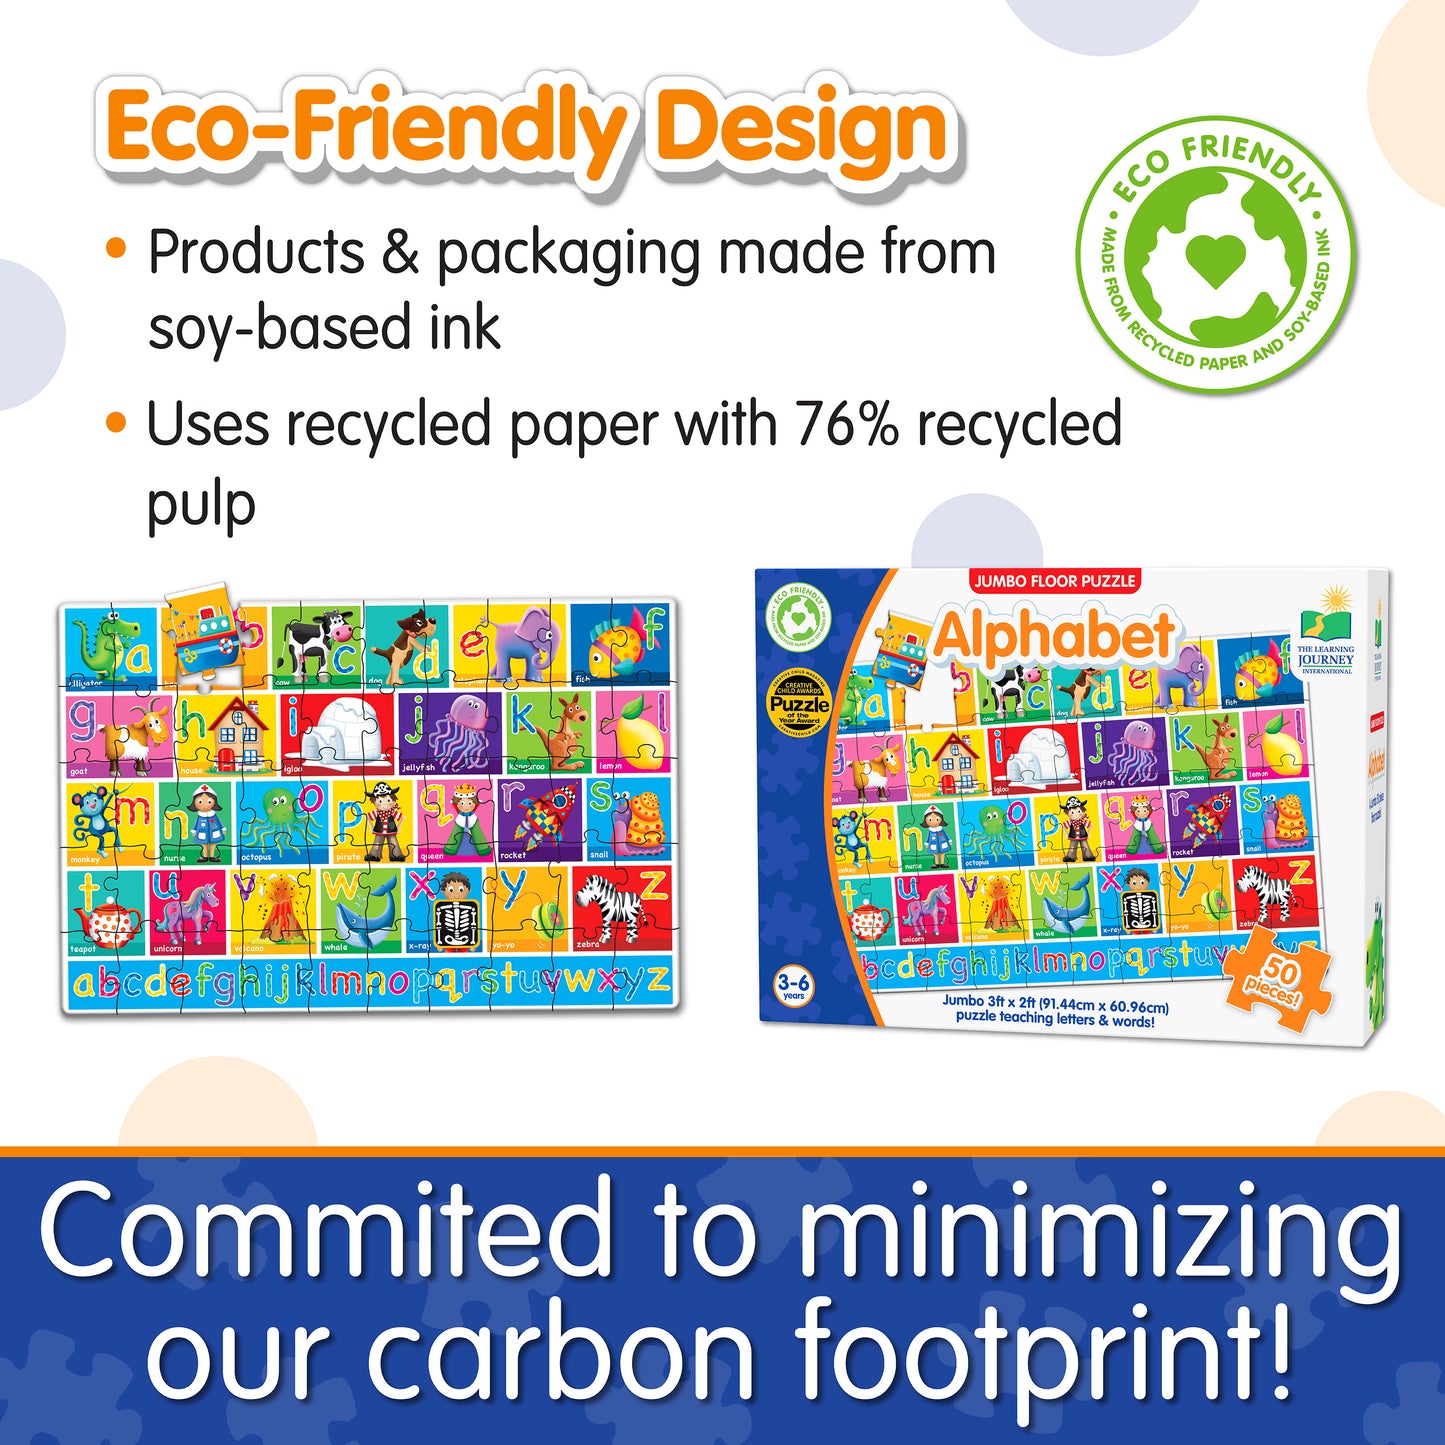 Infographic of Jumbo Floor Puzzle - Alphabet's eco-friendly design that reads, "Commited to minimizing our carbon footprint!"